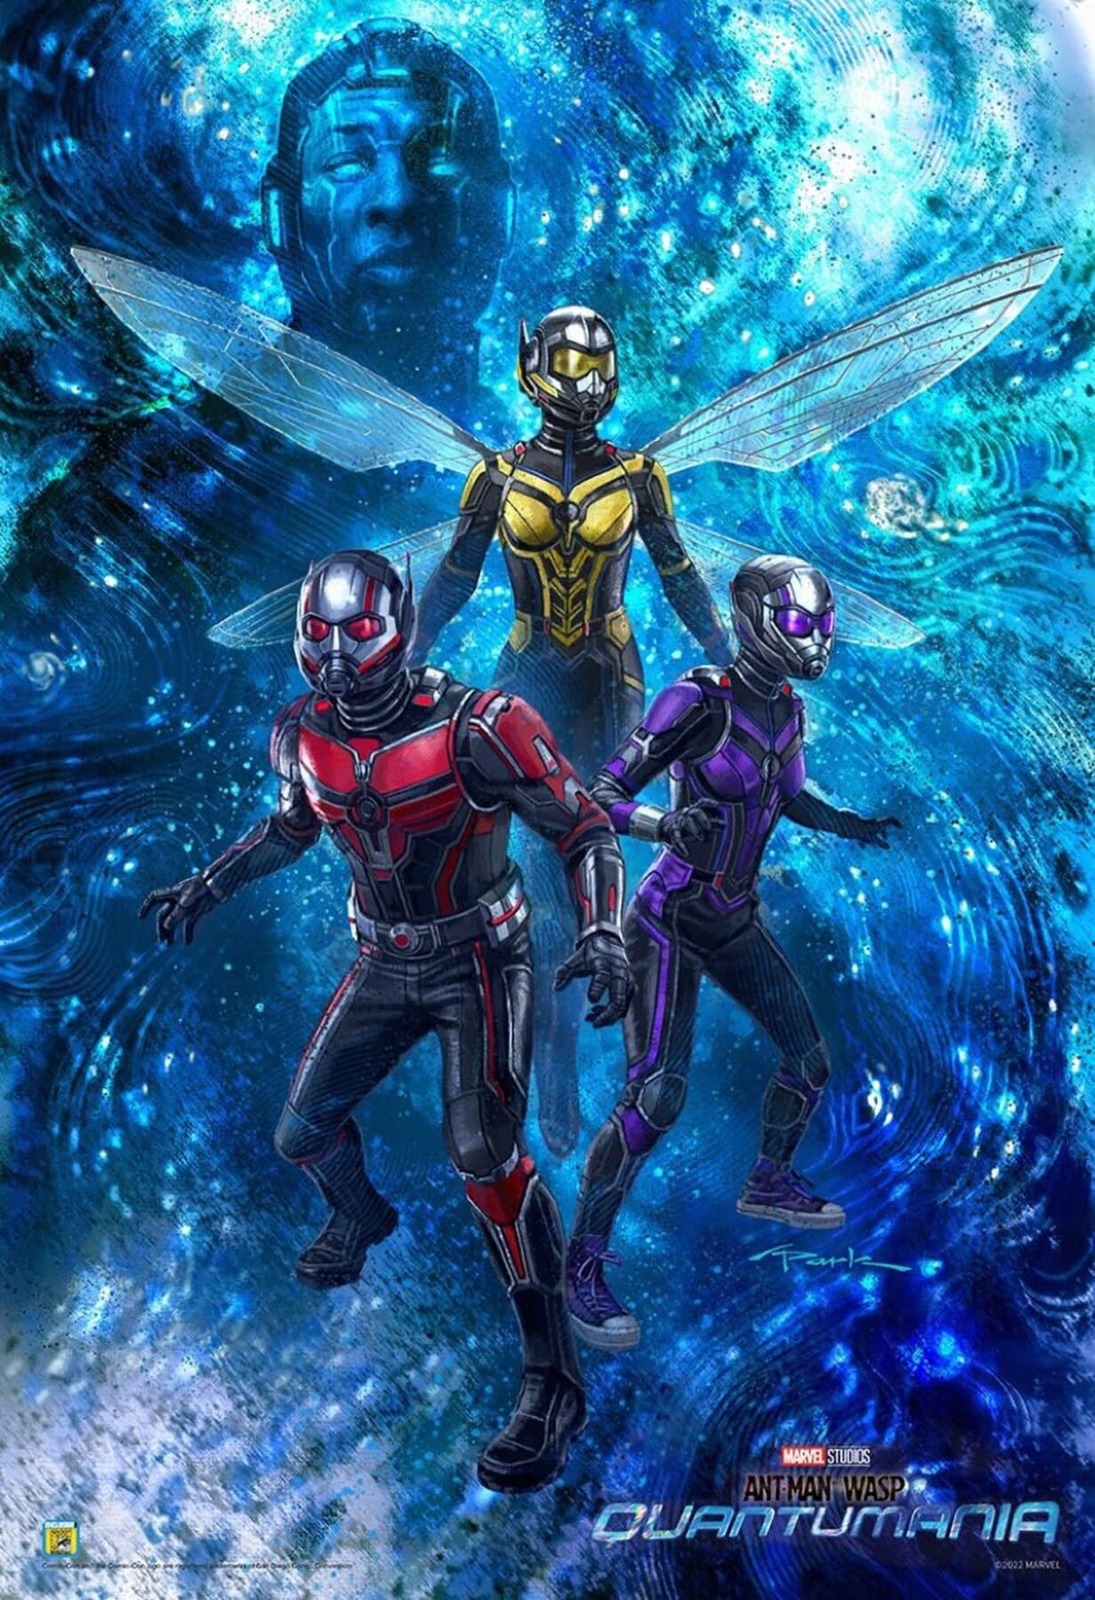 Disney Marvel Studios Ant-Man and the Wasp: Quantumania Movie Poster E – A  Birthday Place